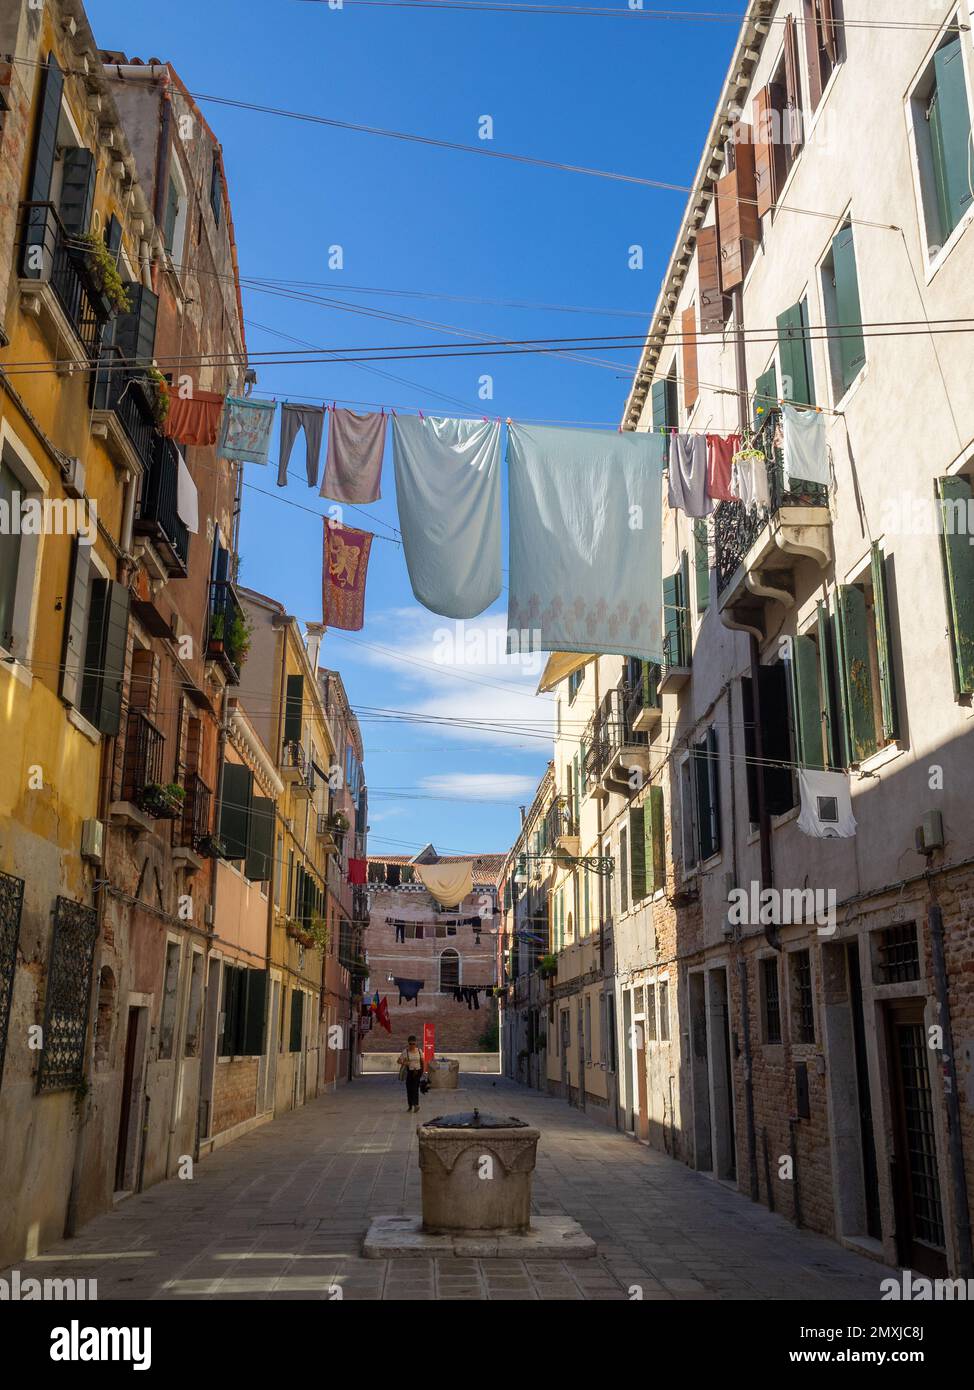 Castello street with drying clothes, Venice Stock Photo